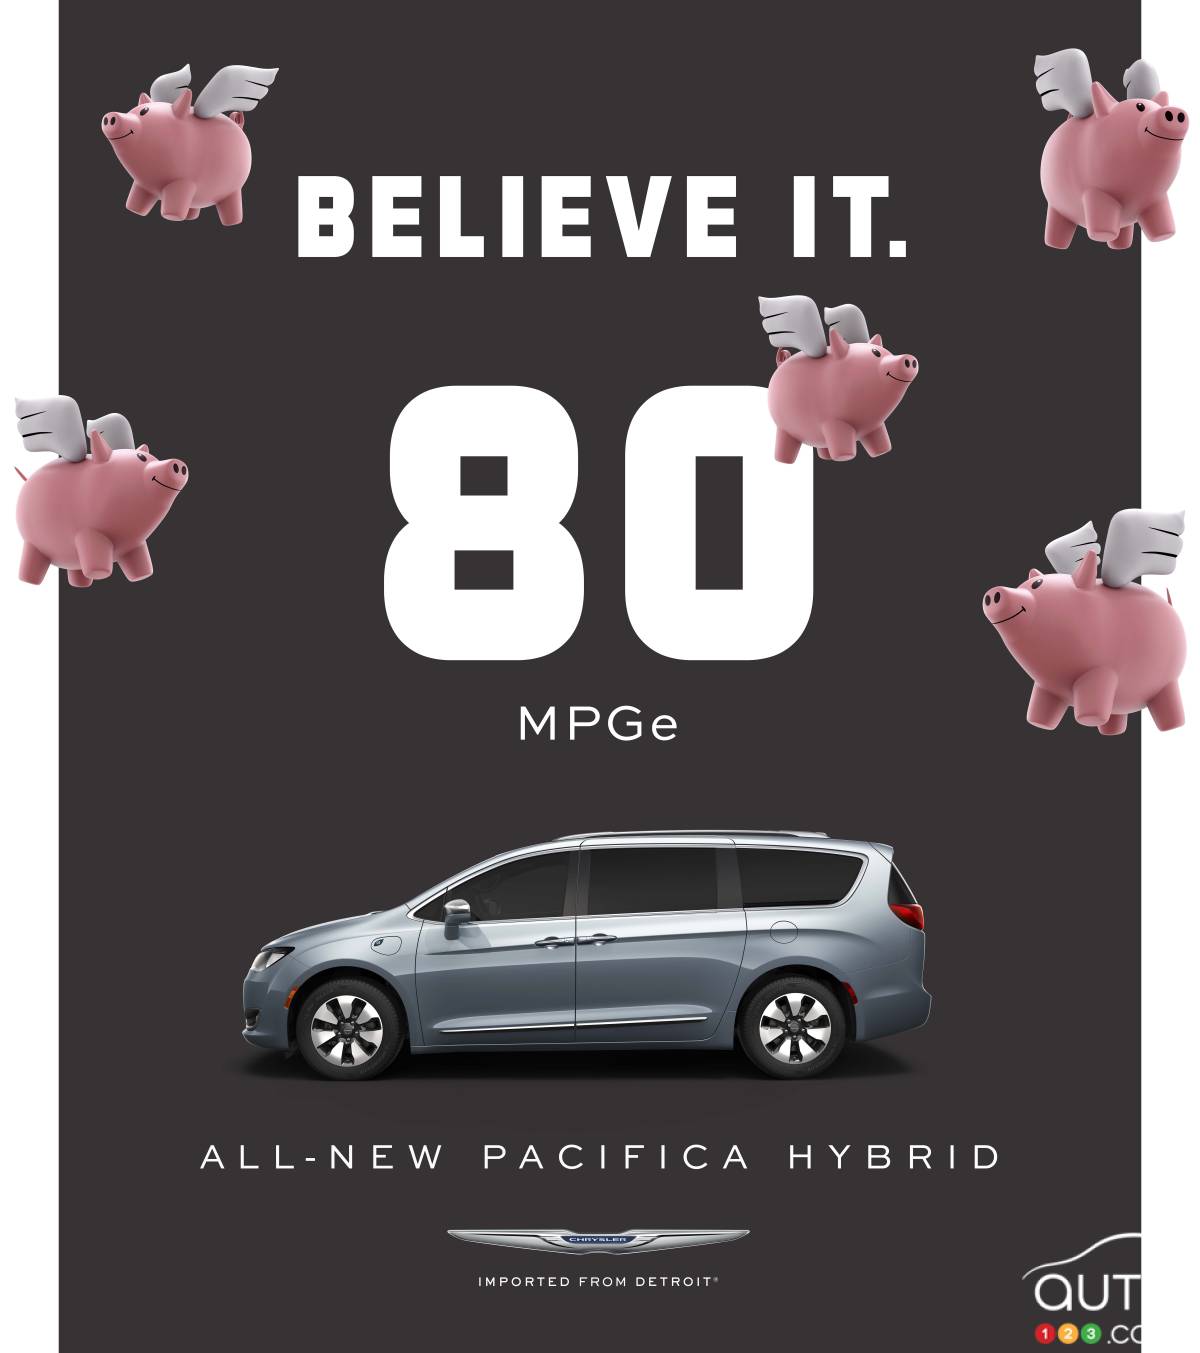 The 2017 Chrysler Pacifica Hybrid Has Arrived!